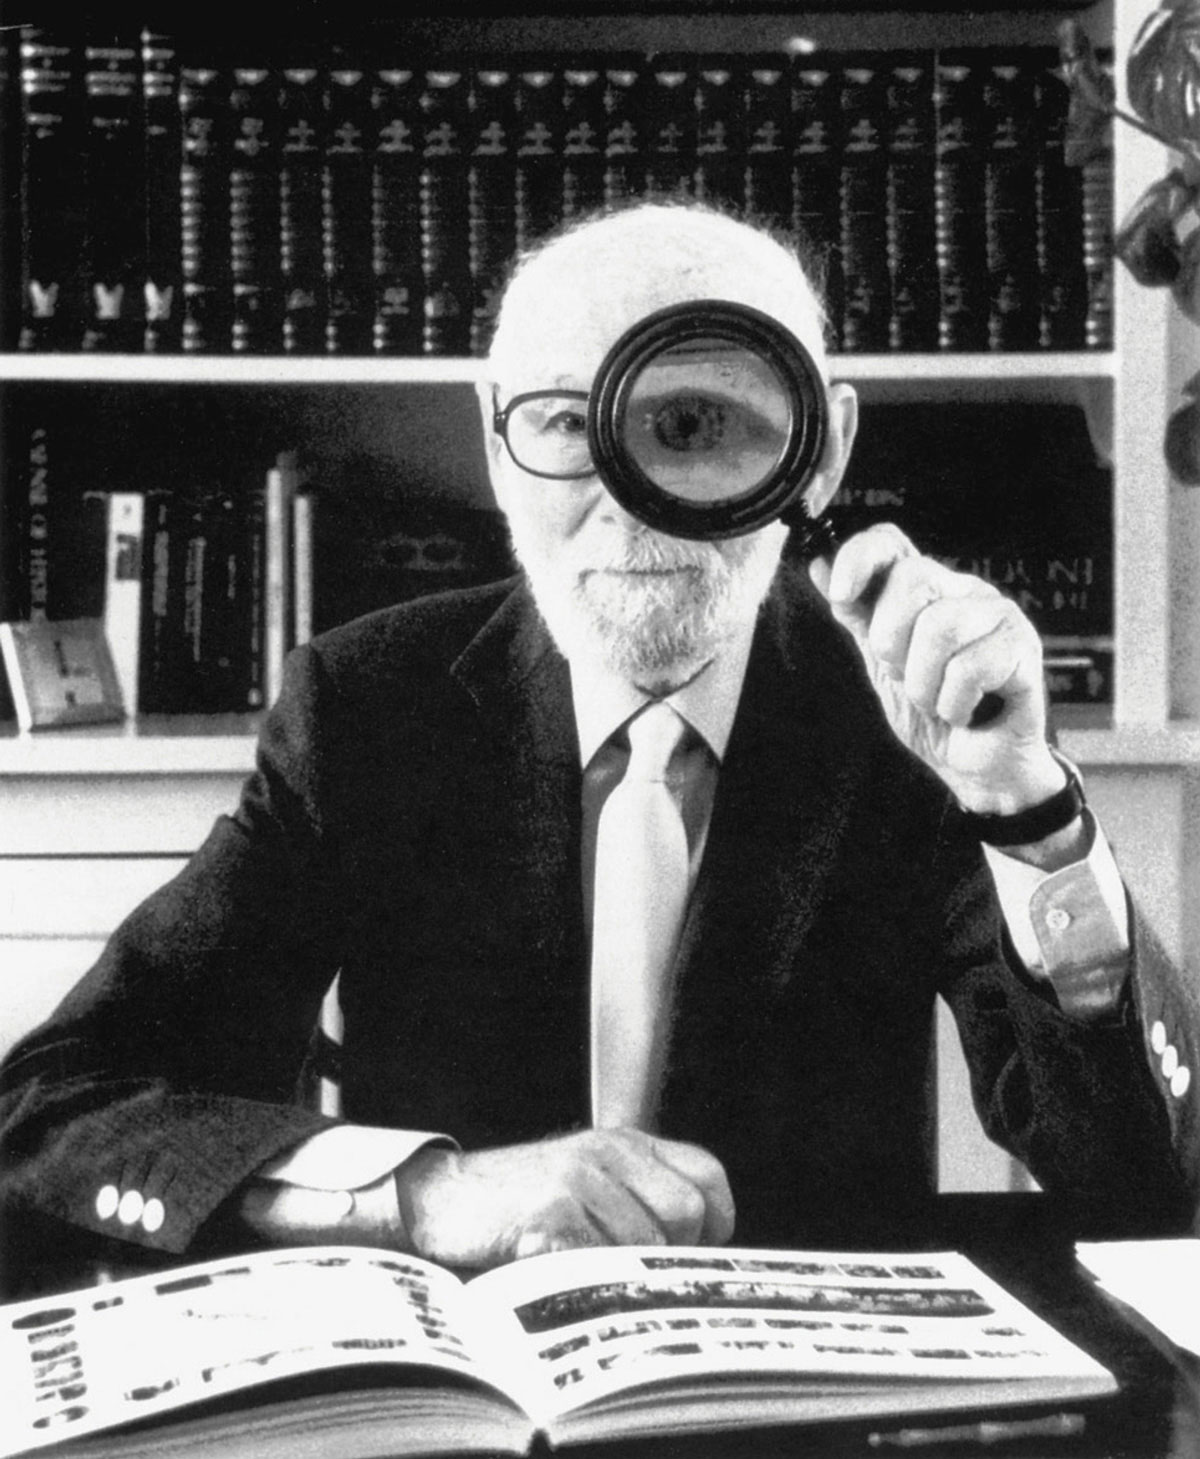 One more example of the “magnifying glass in front of the eye” genre, here in an image of Otto Bettmann in nineteen eighty eight. 